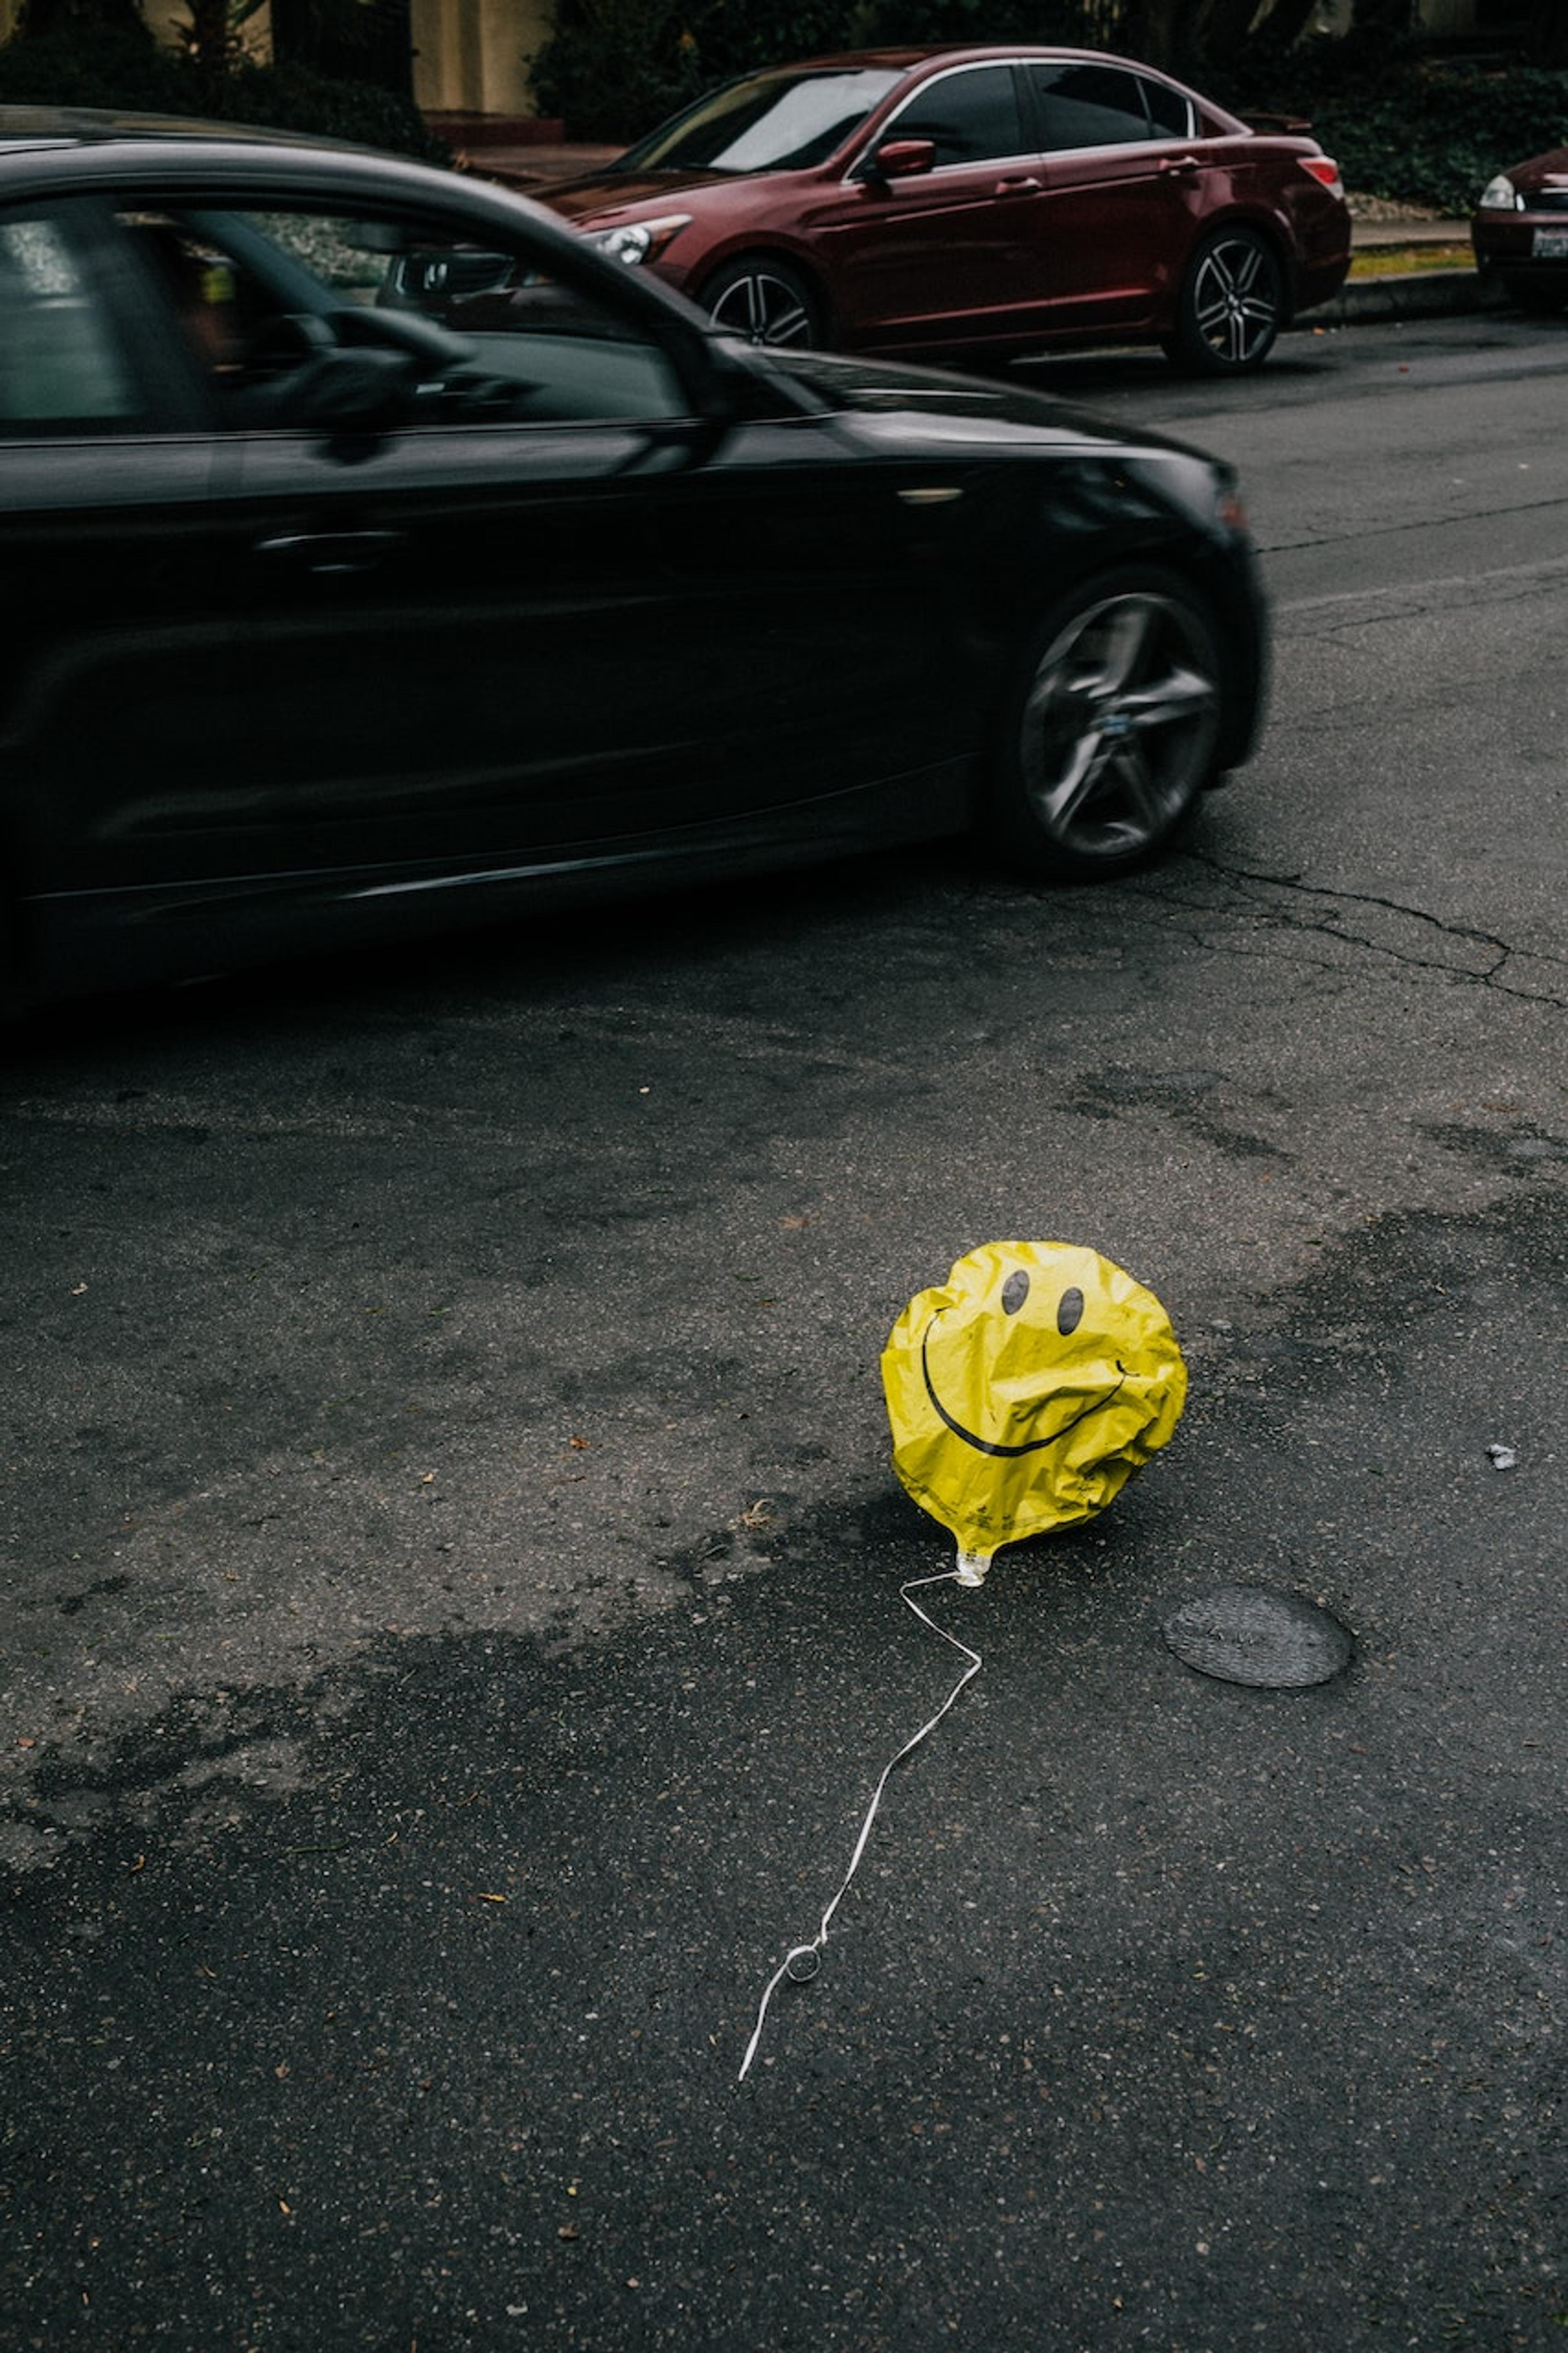 A deflated yellow smiley-face balloon blows along the pavement while cars drive by